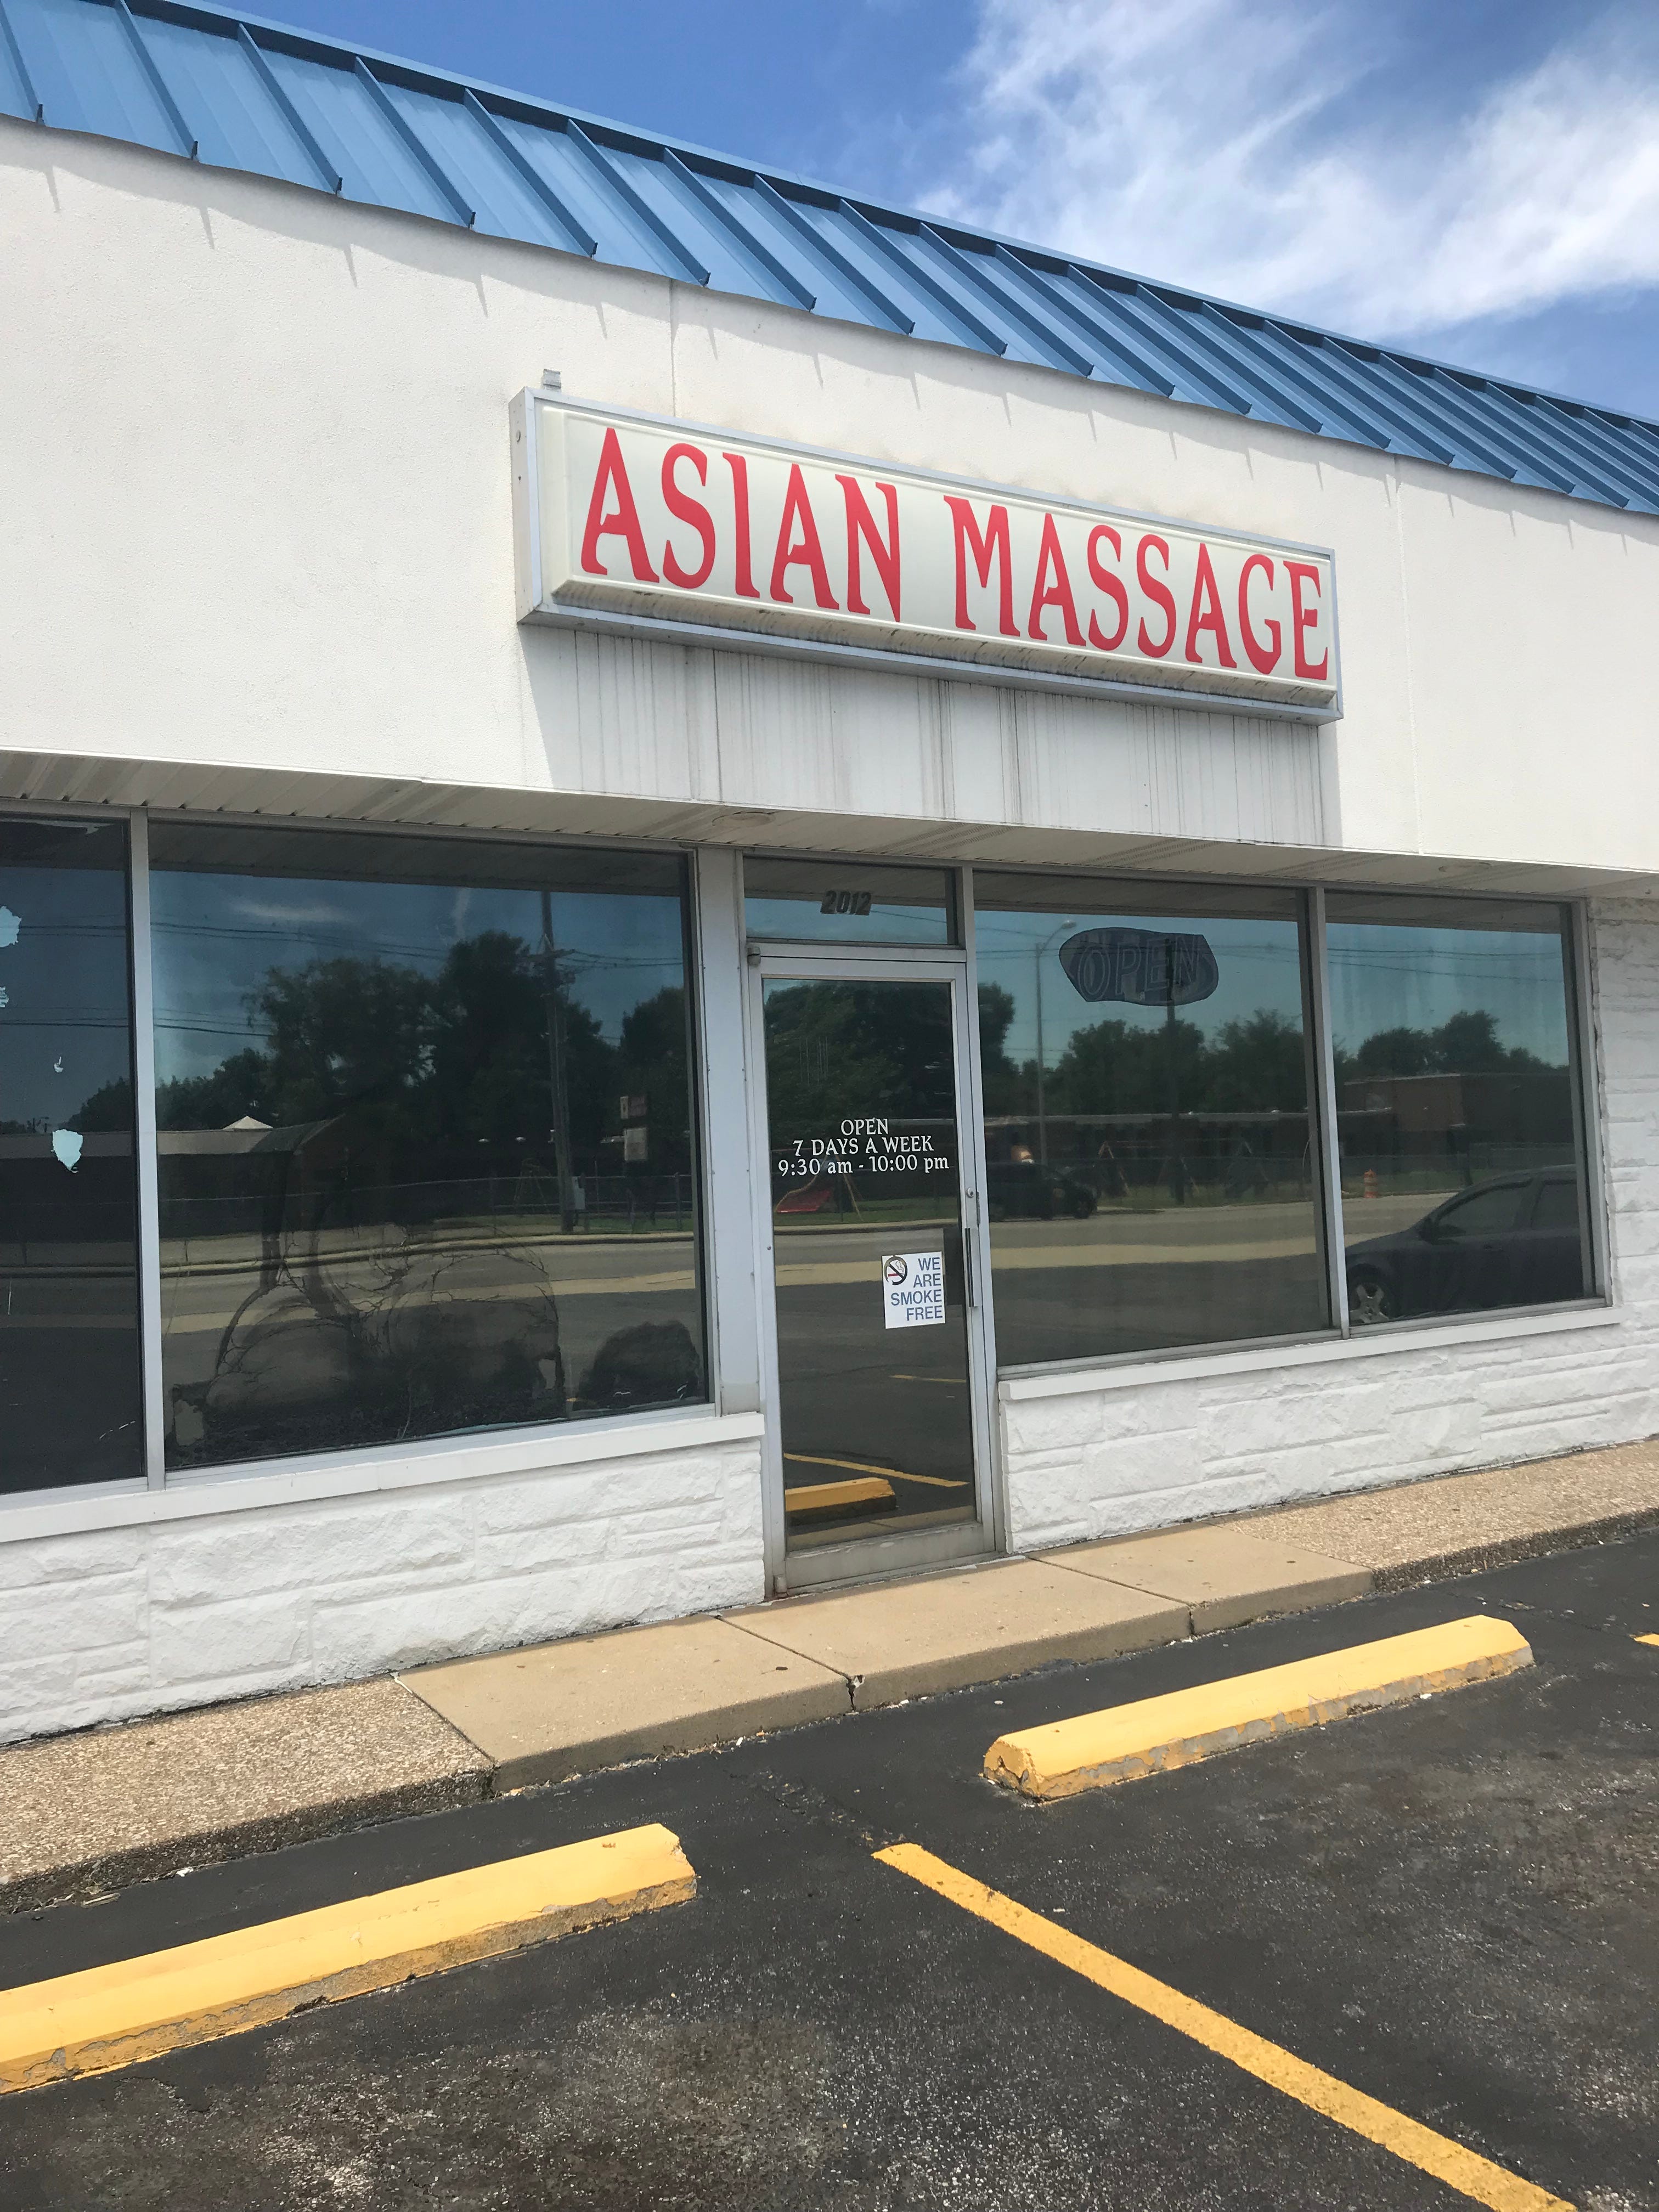 Asian massage stories and pictures